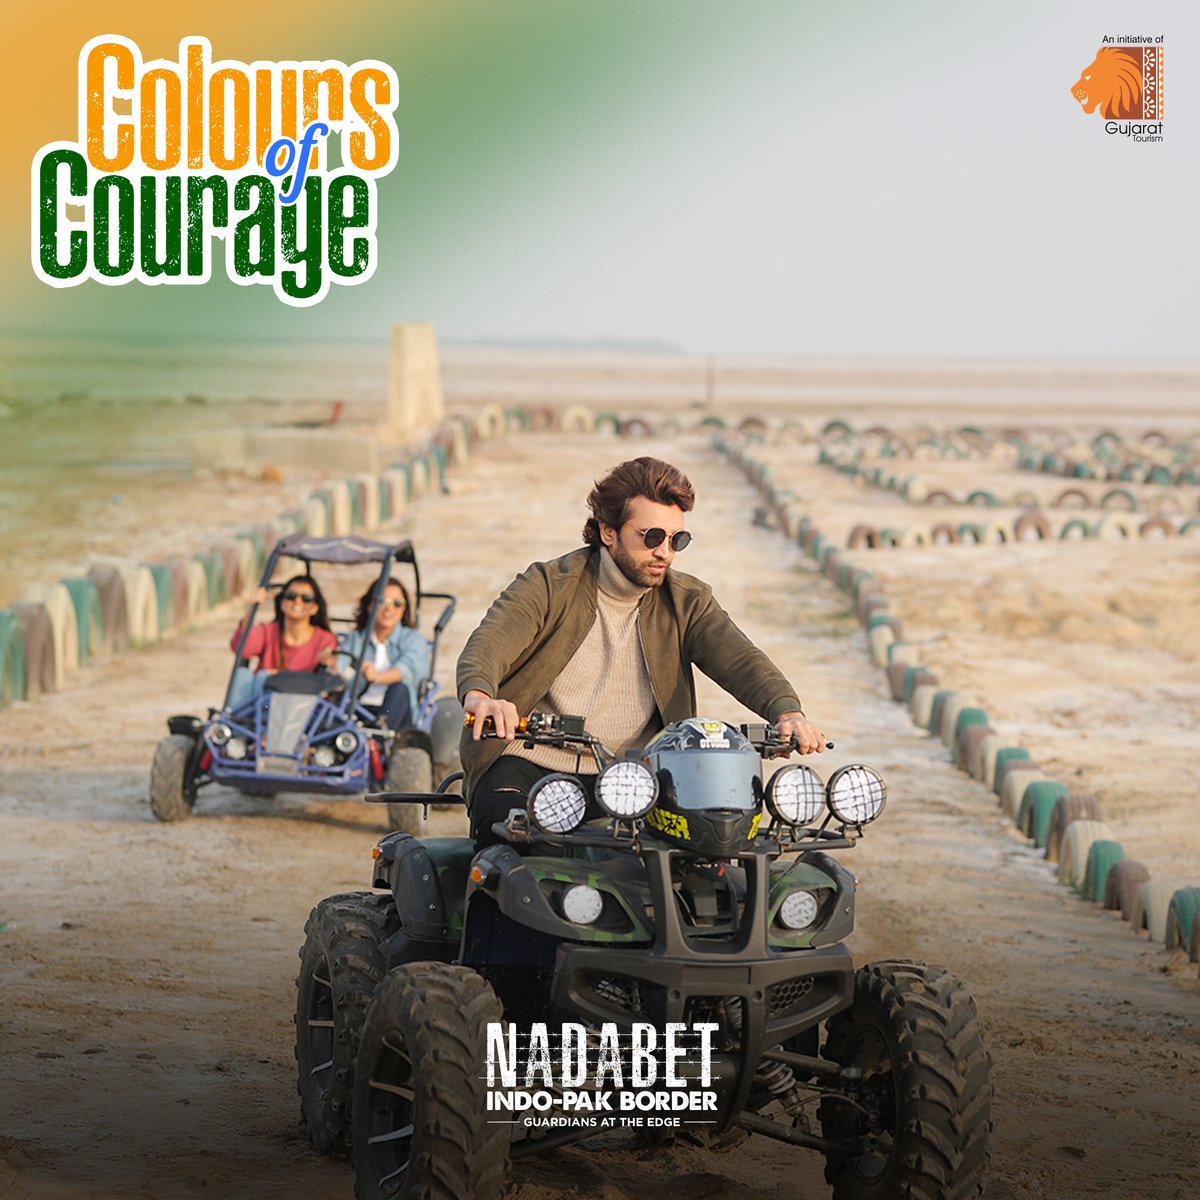 Conquer the off-road trails of the Nadabet Indo-Pak Border with an ATV ride. Along with indulging in an adrenaline-fueled escapade, you will also experience the thrill of patriotism.

#colorsofcourage #atvride #atvriders #atvrides #visitnadabet #gujarattourism #exploregujarat